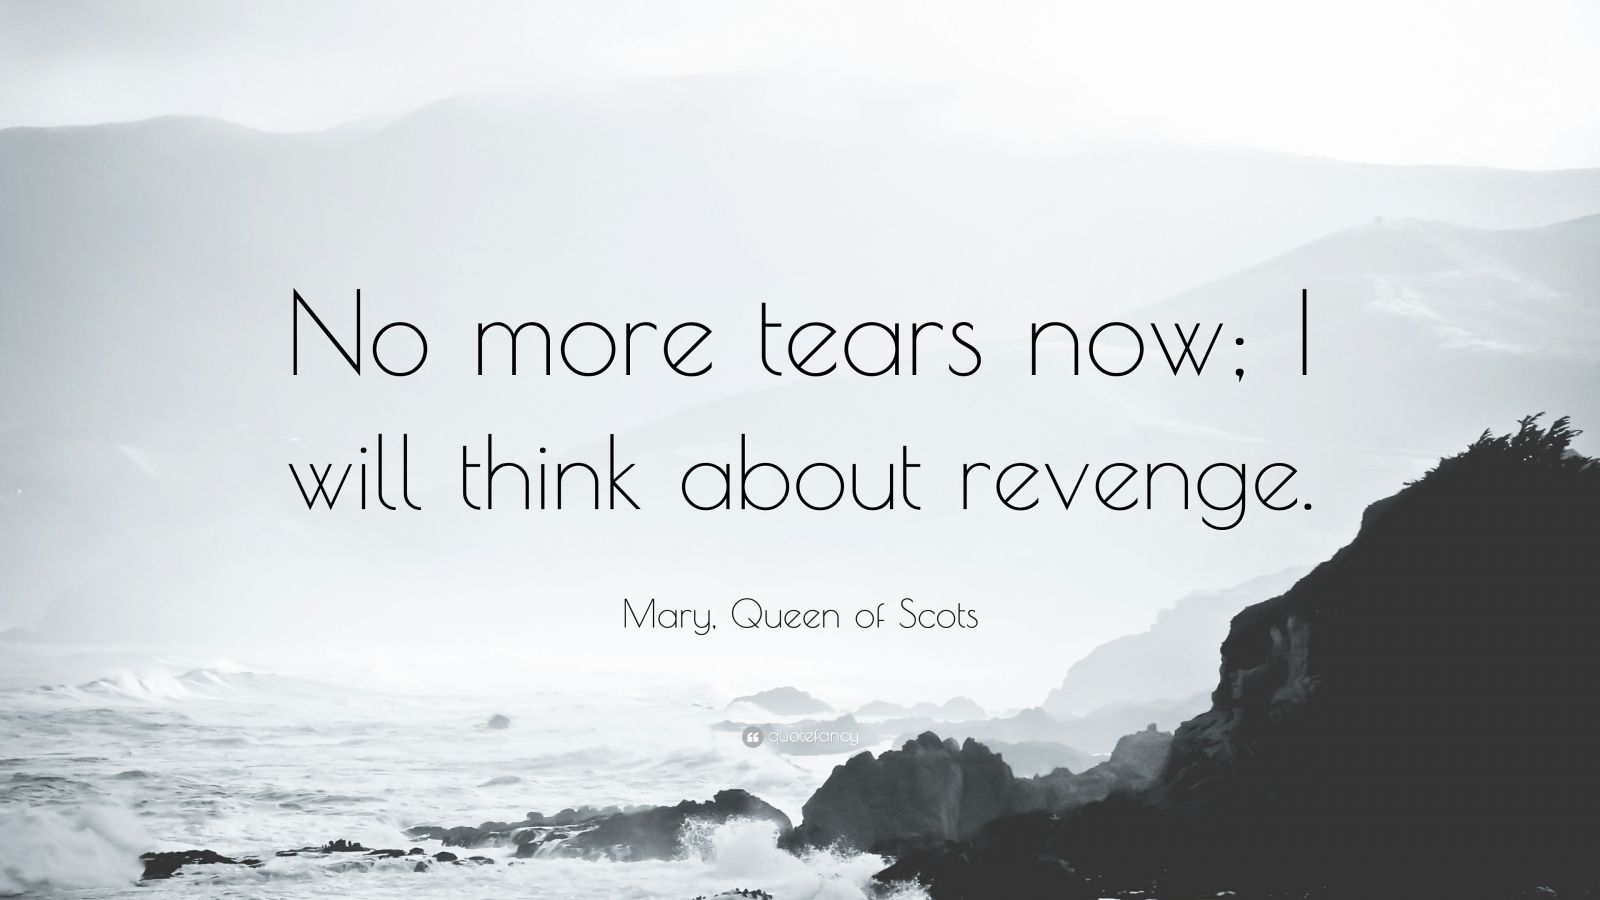 Mary, Queen of Scots Quote: tears “No about I now; will think more